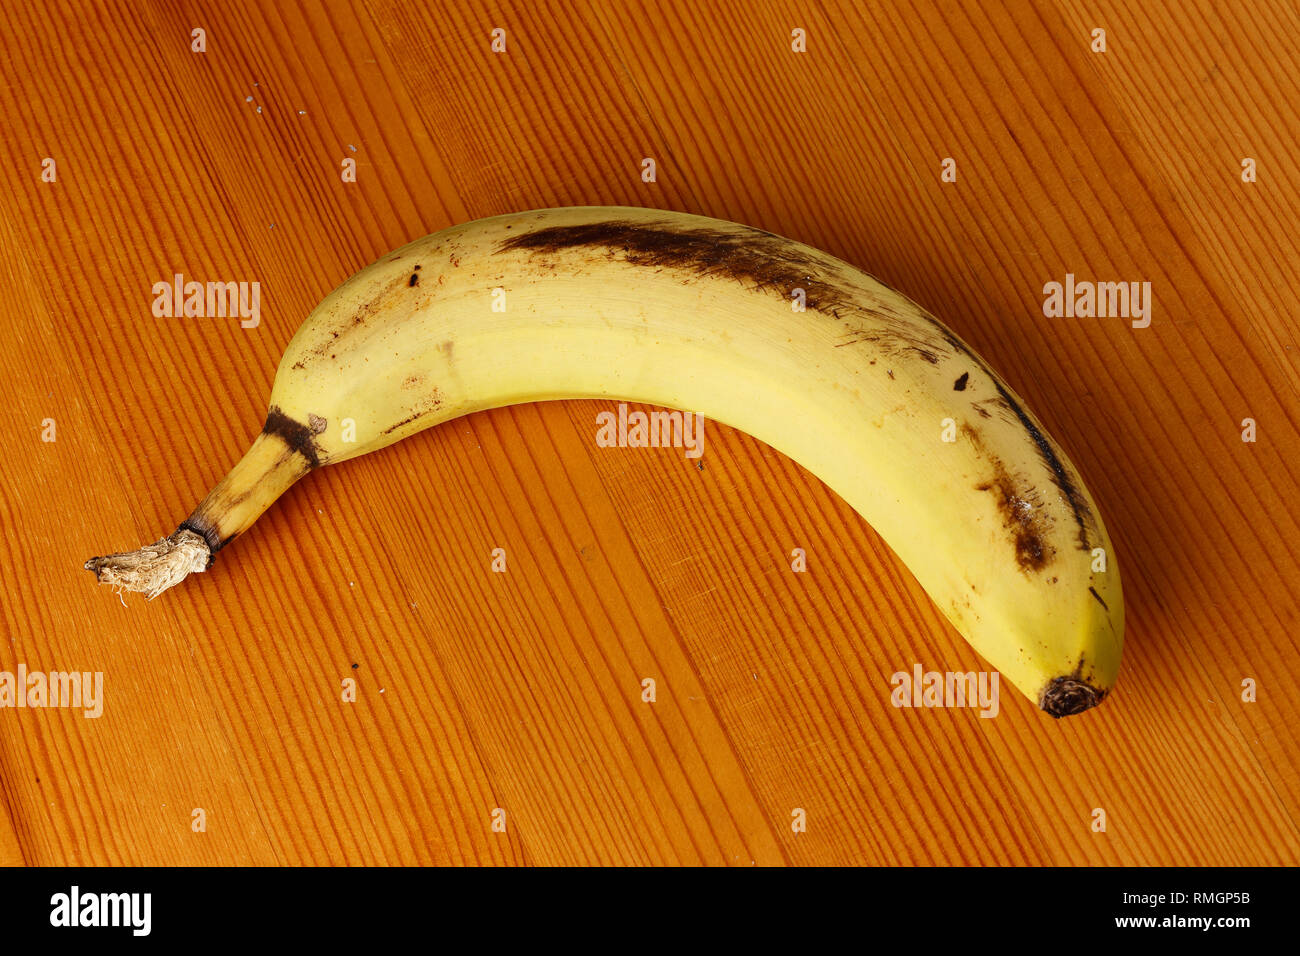 One unpeeled yellow banana on a wooden table top. Stock Photo